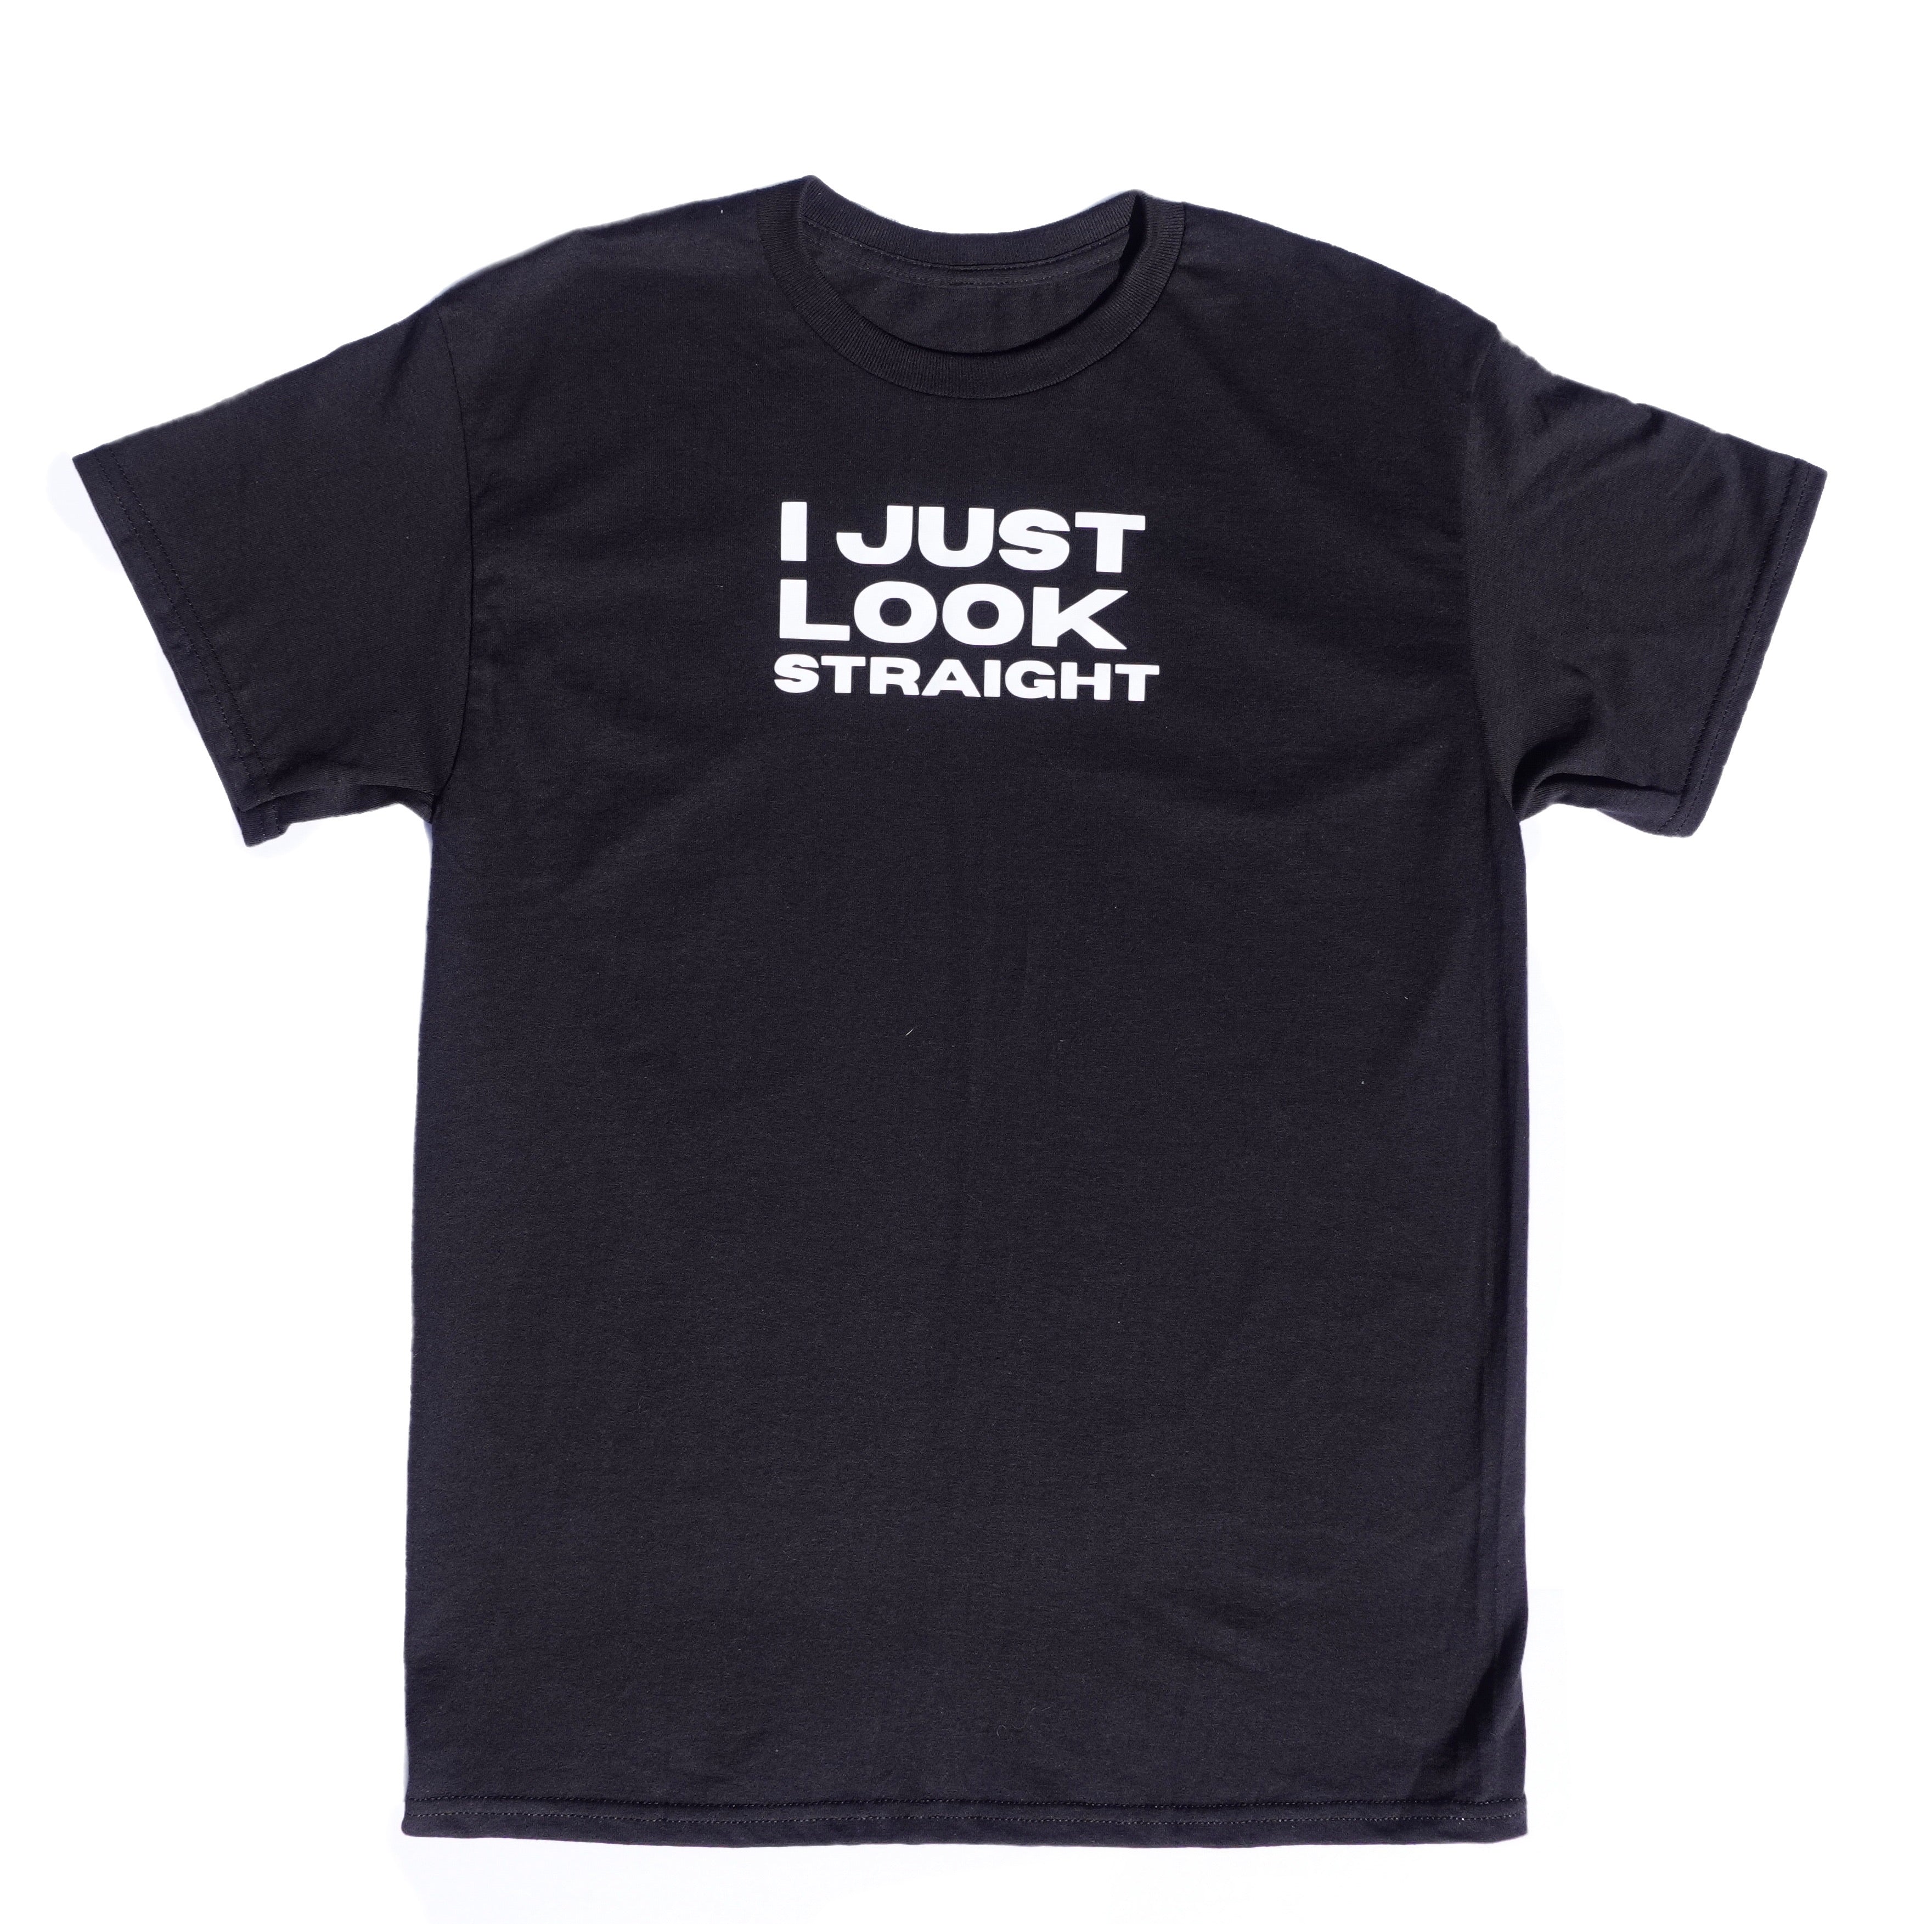 I Just Look Straight Tee- The Brand Neutral